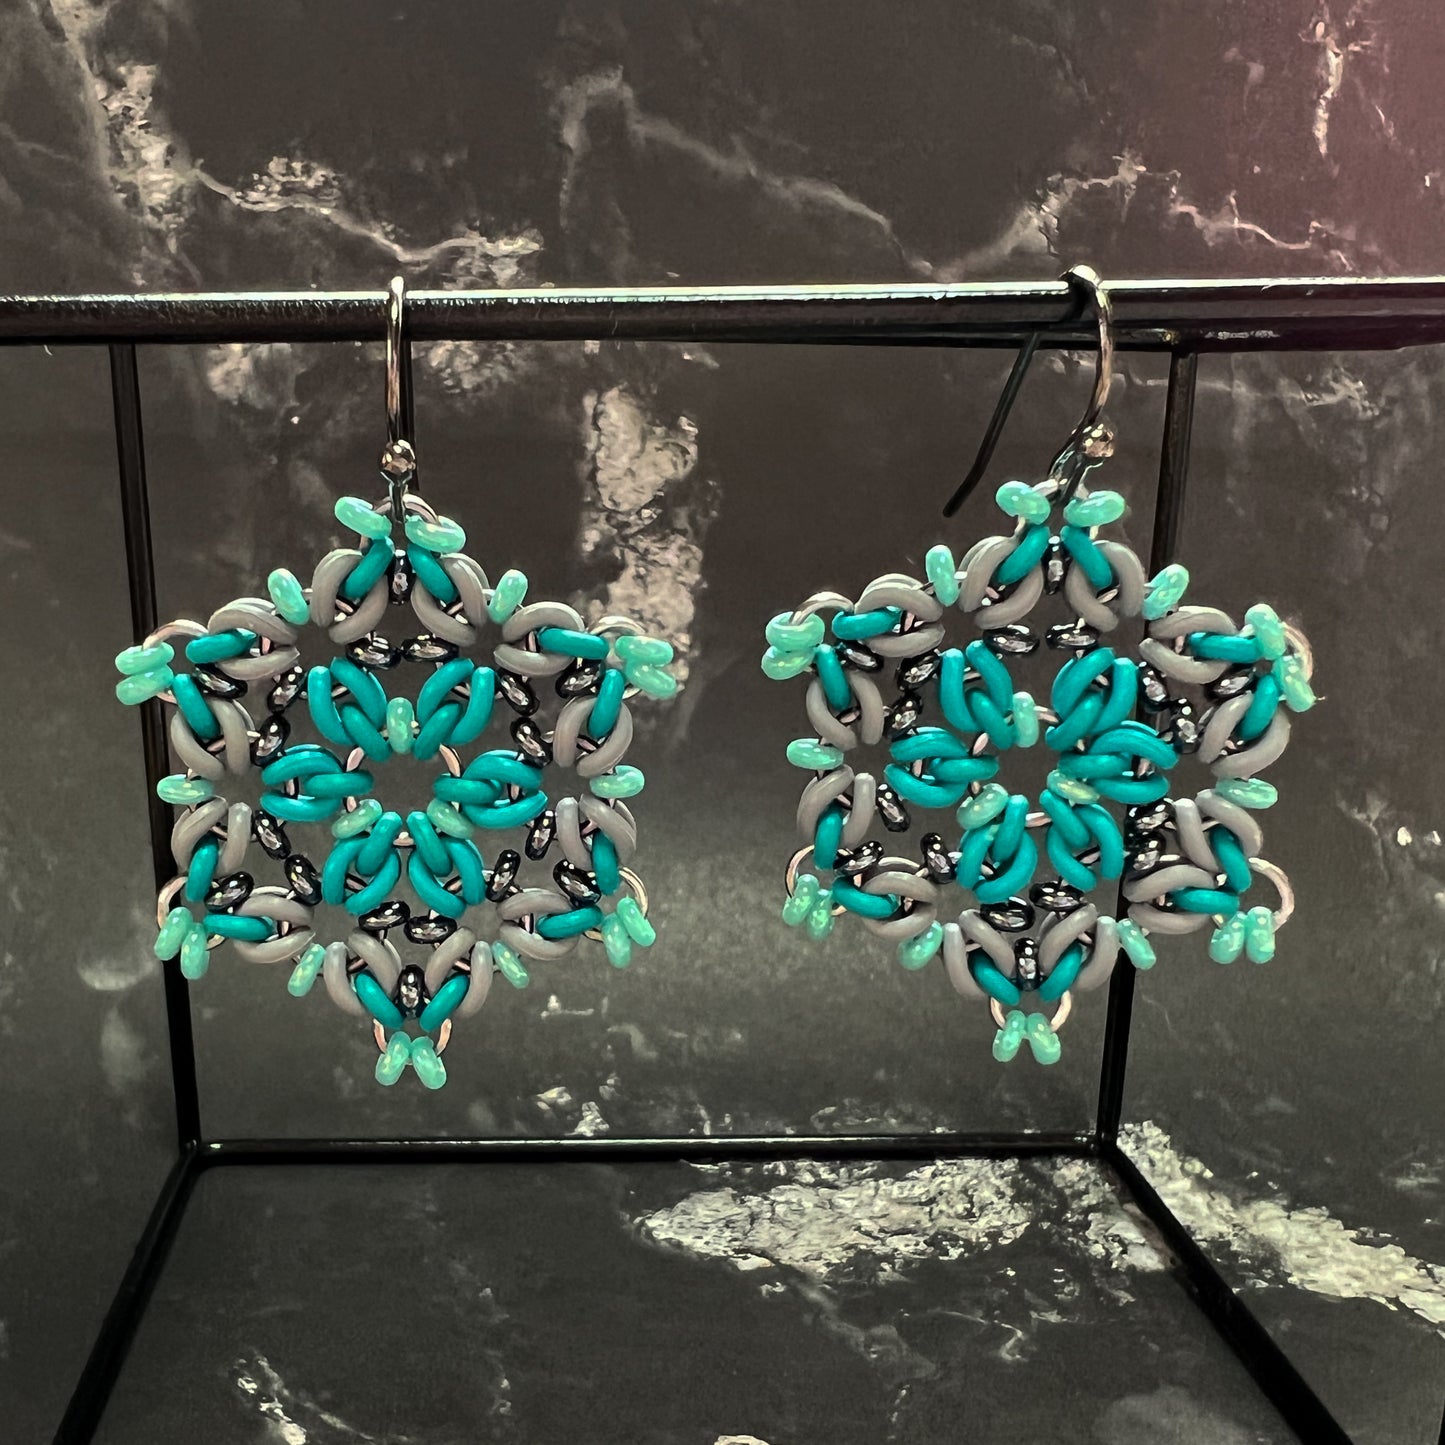 Tri Flower Beaded Earrings Mini Kit and Free Video Grey and Teal